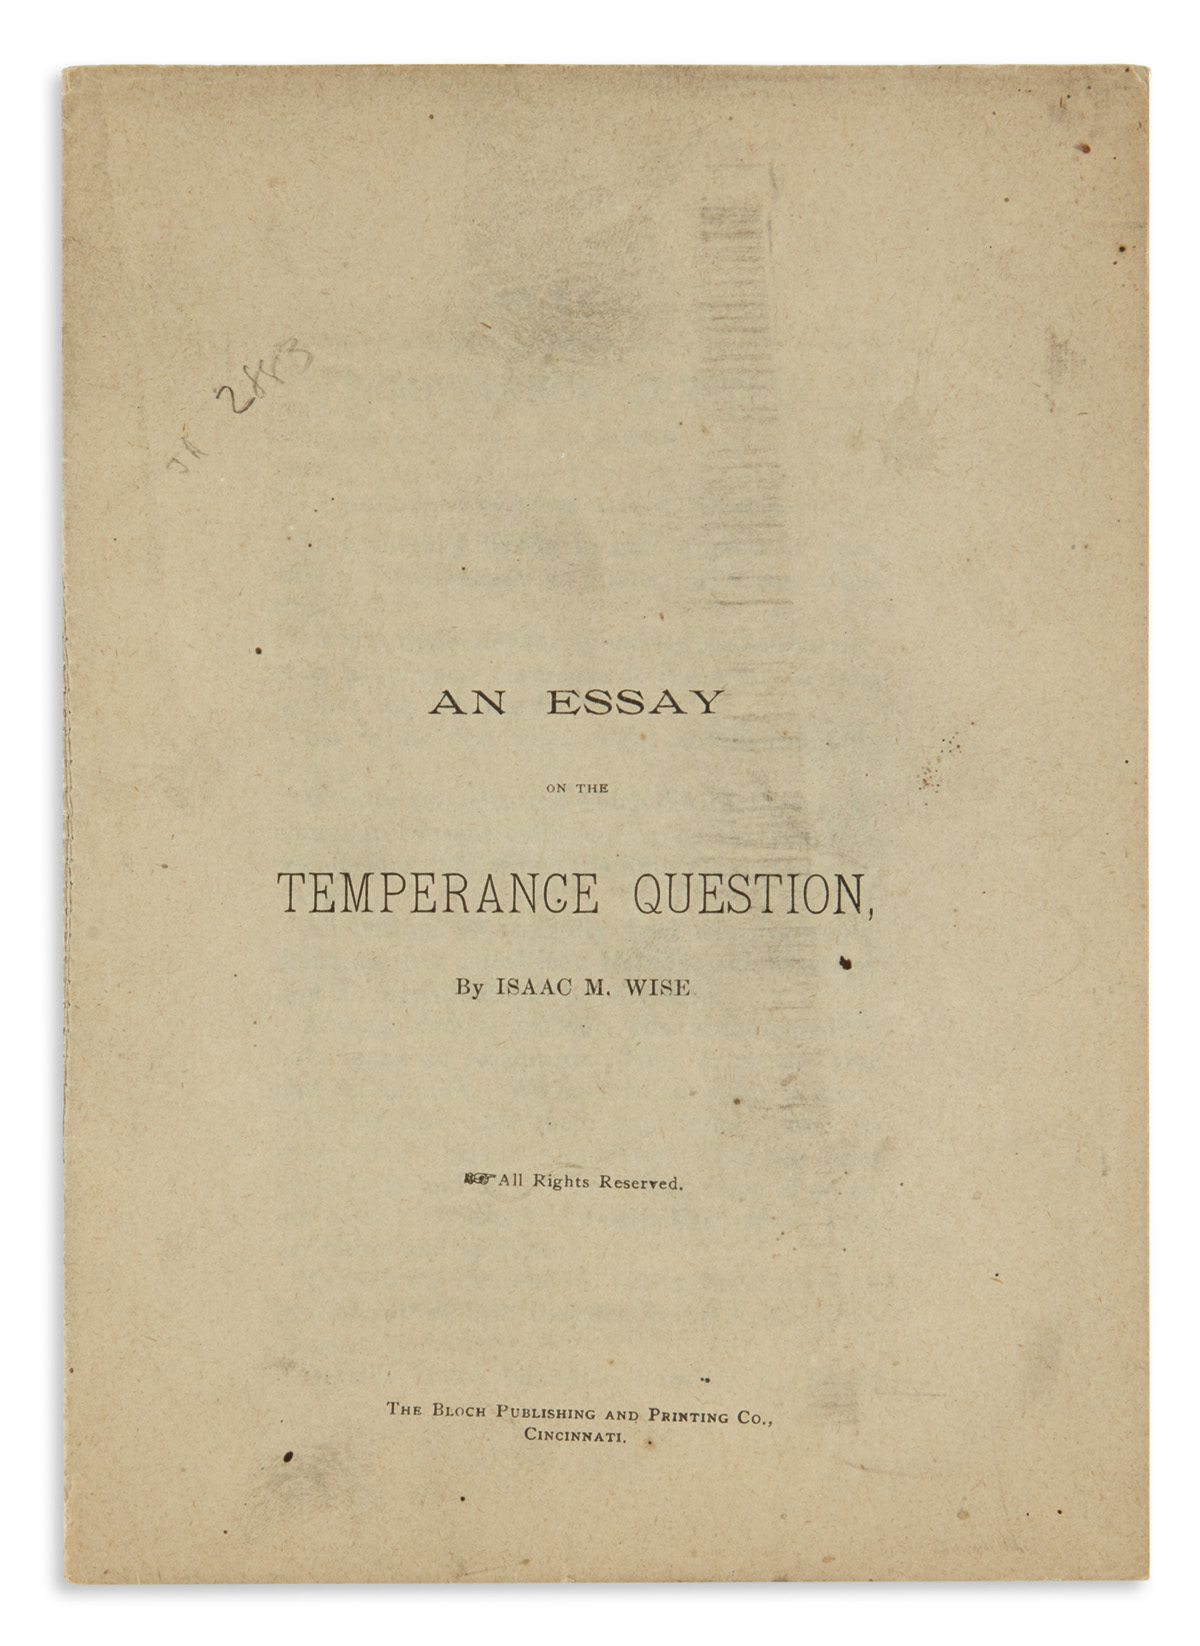 (JUDAICA.) Wise, Isaac M. An Essay on the Temperance Question.